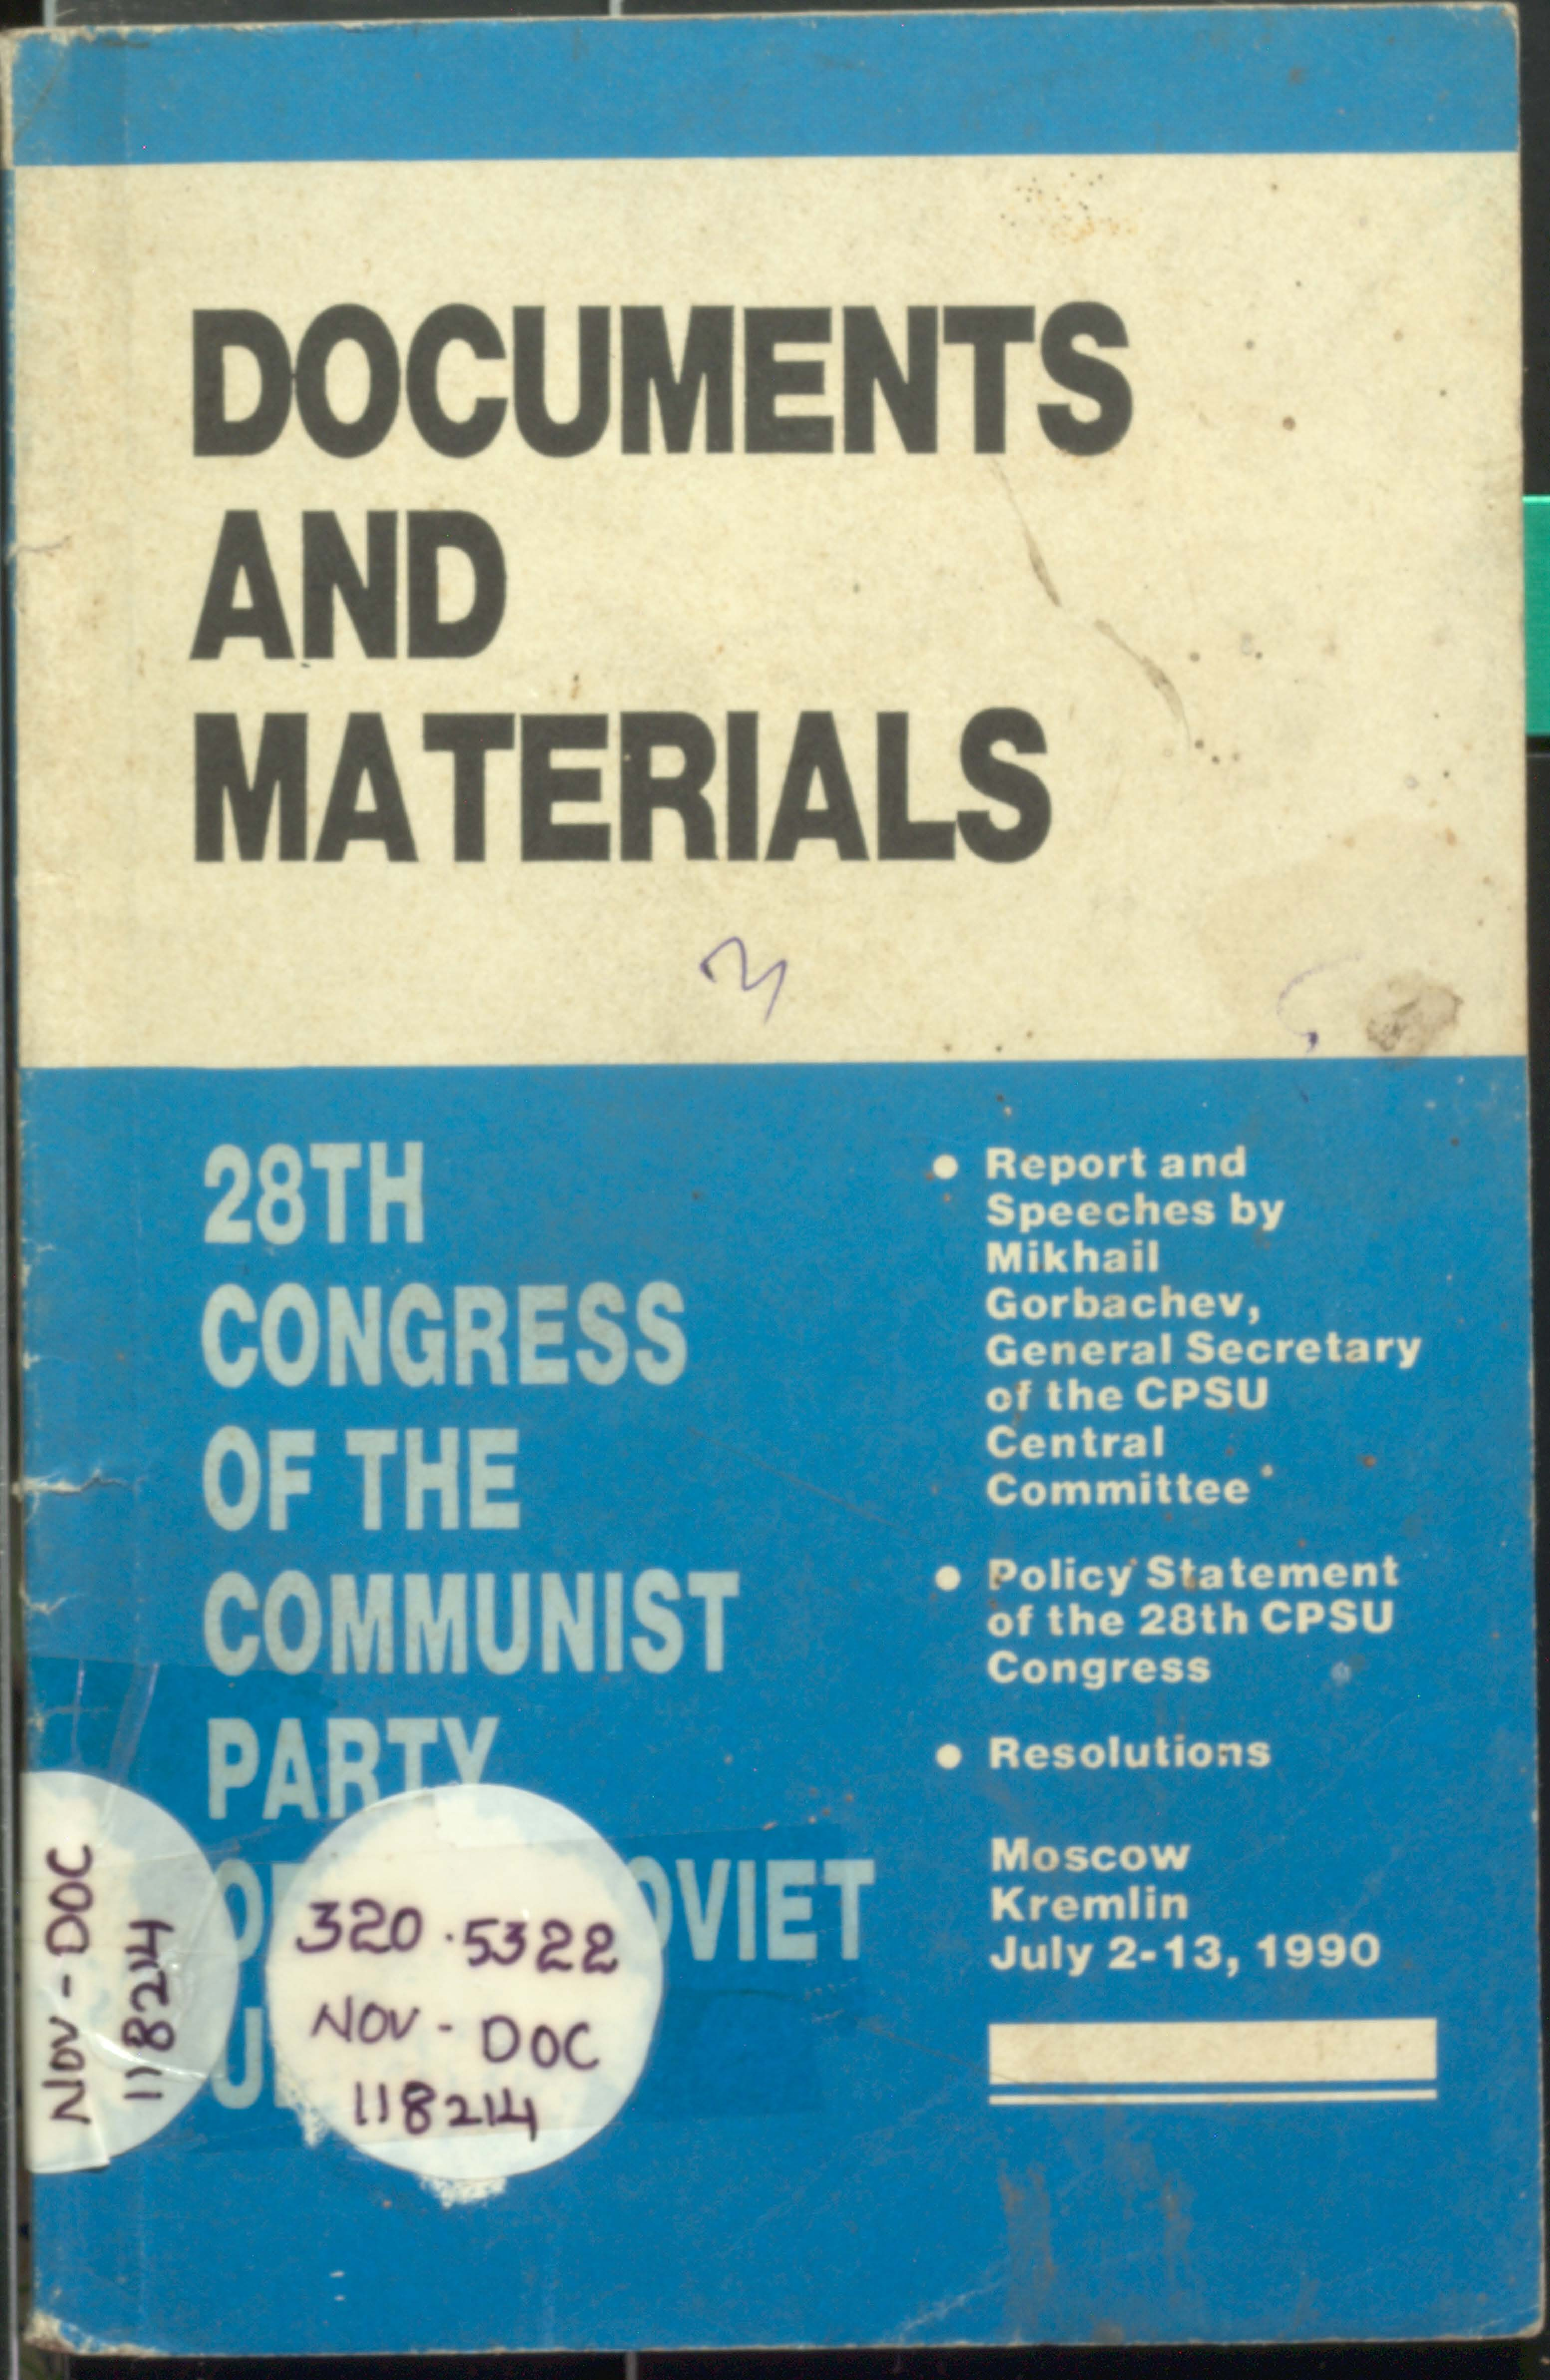 DOCMENTS AND MATERLALS 28 th congress of the communist party of the sovlet union